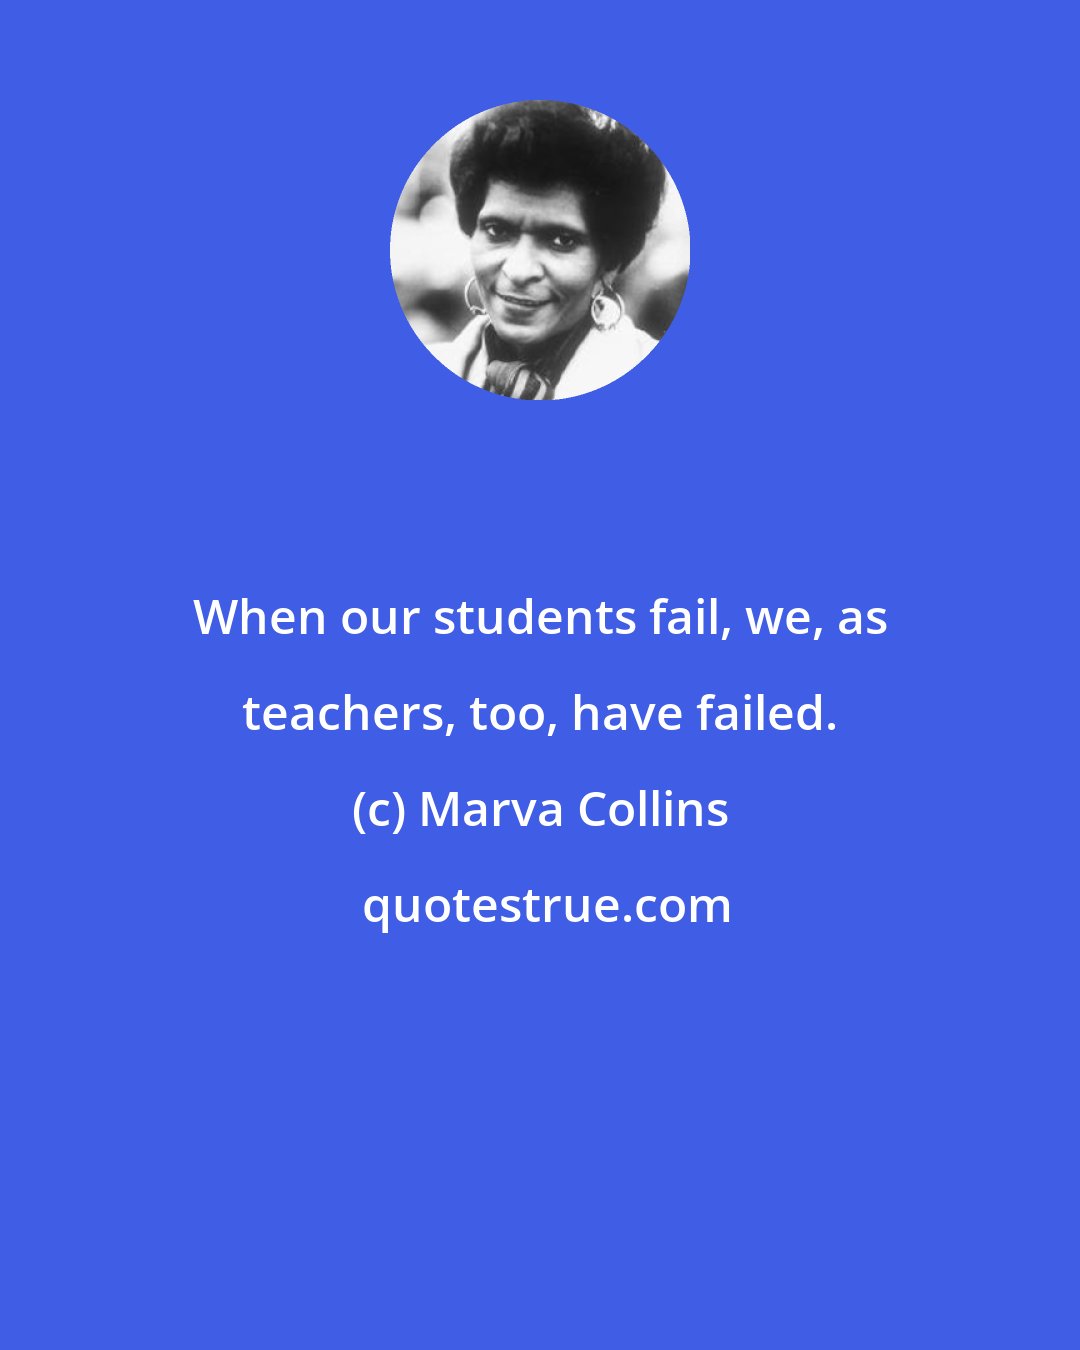 Marva Collins: When our students fail, we, as teachers, too, have failed.